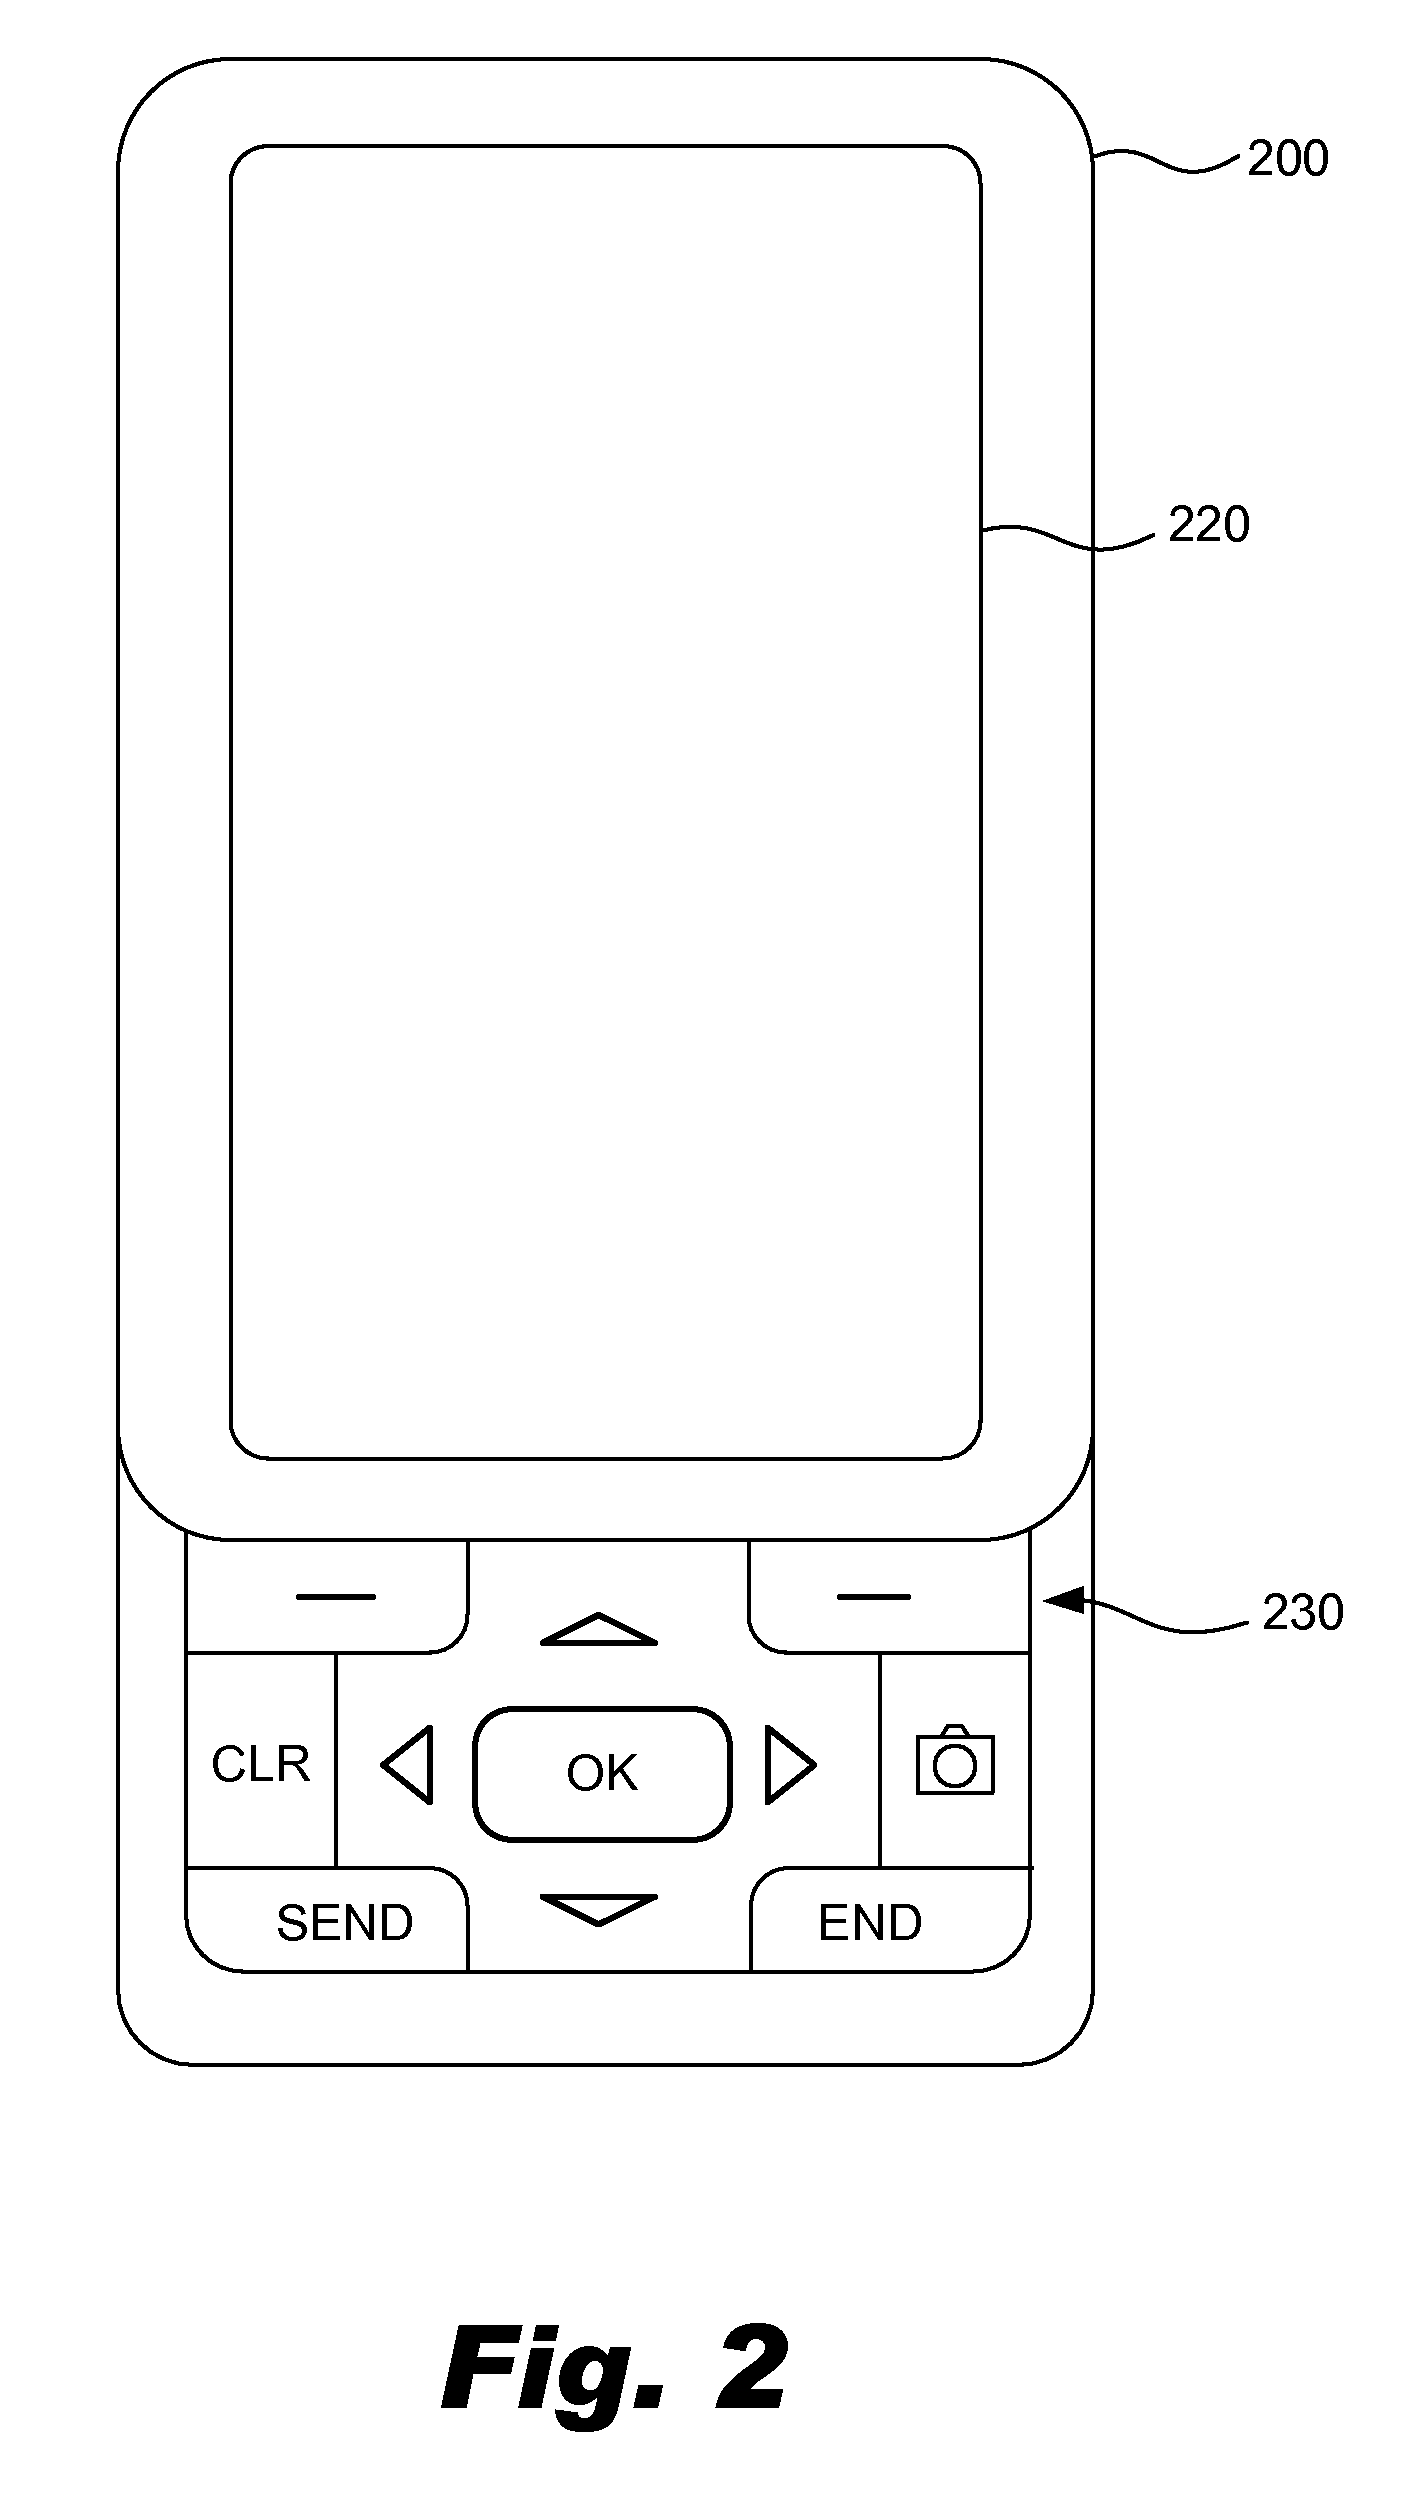 Proximity interface apparatuses, systems, and methods